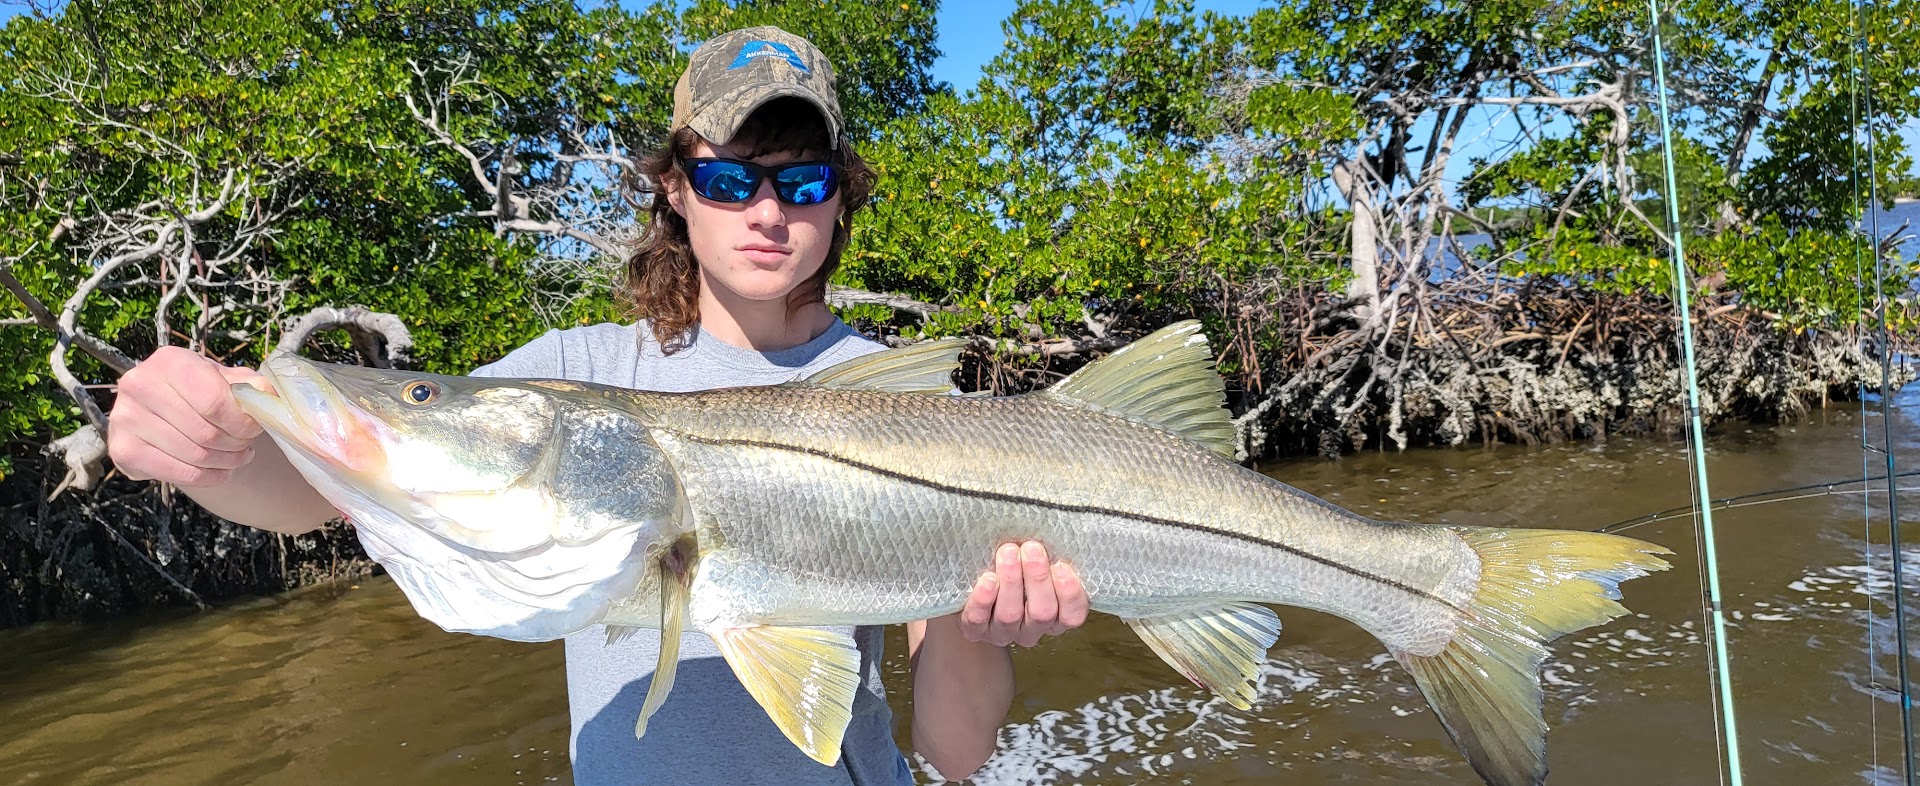 Cold Windy Weather Fishing, First Big Snook - Naples Fishing Guide